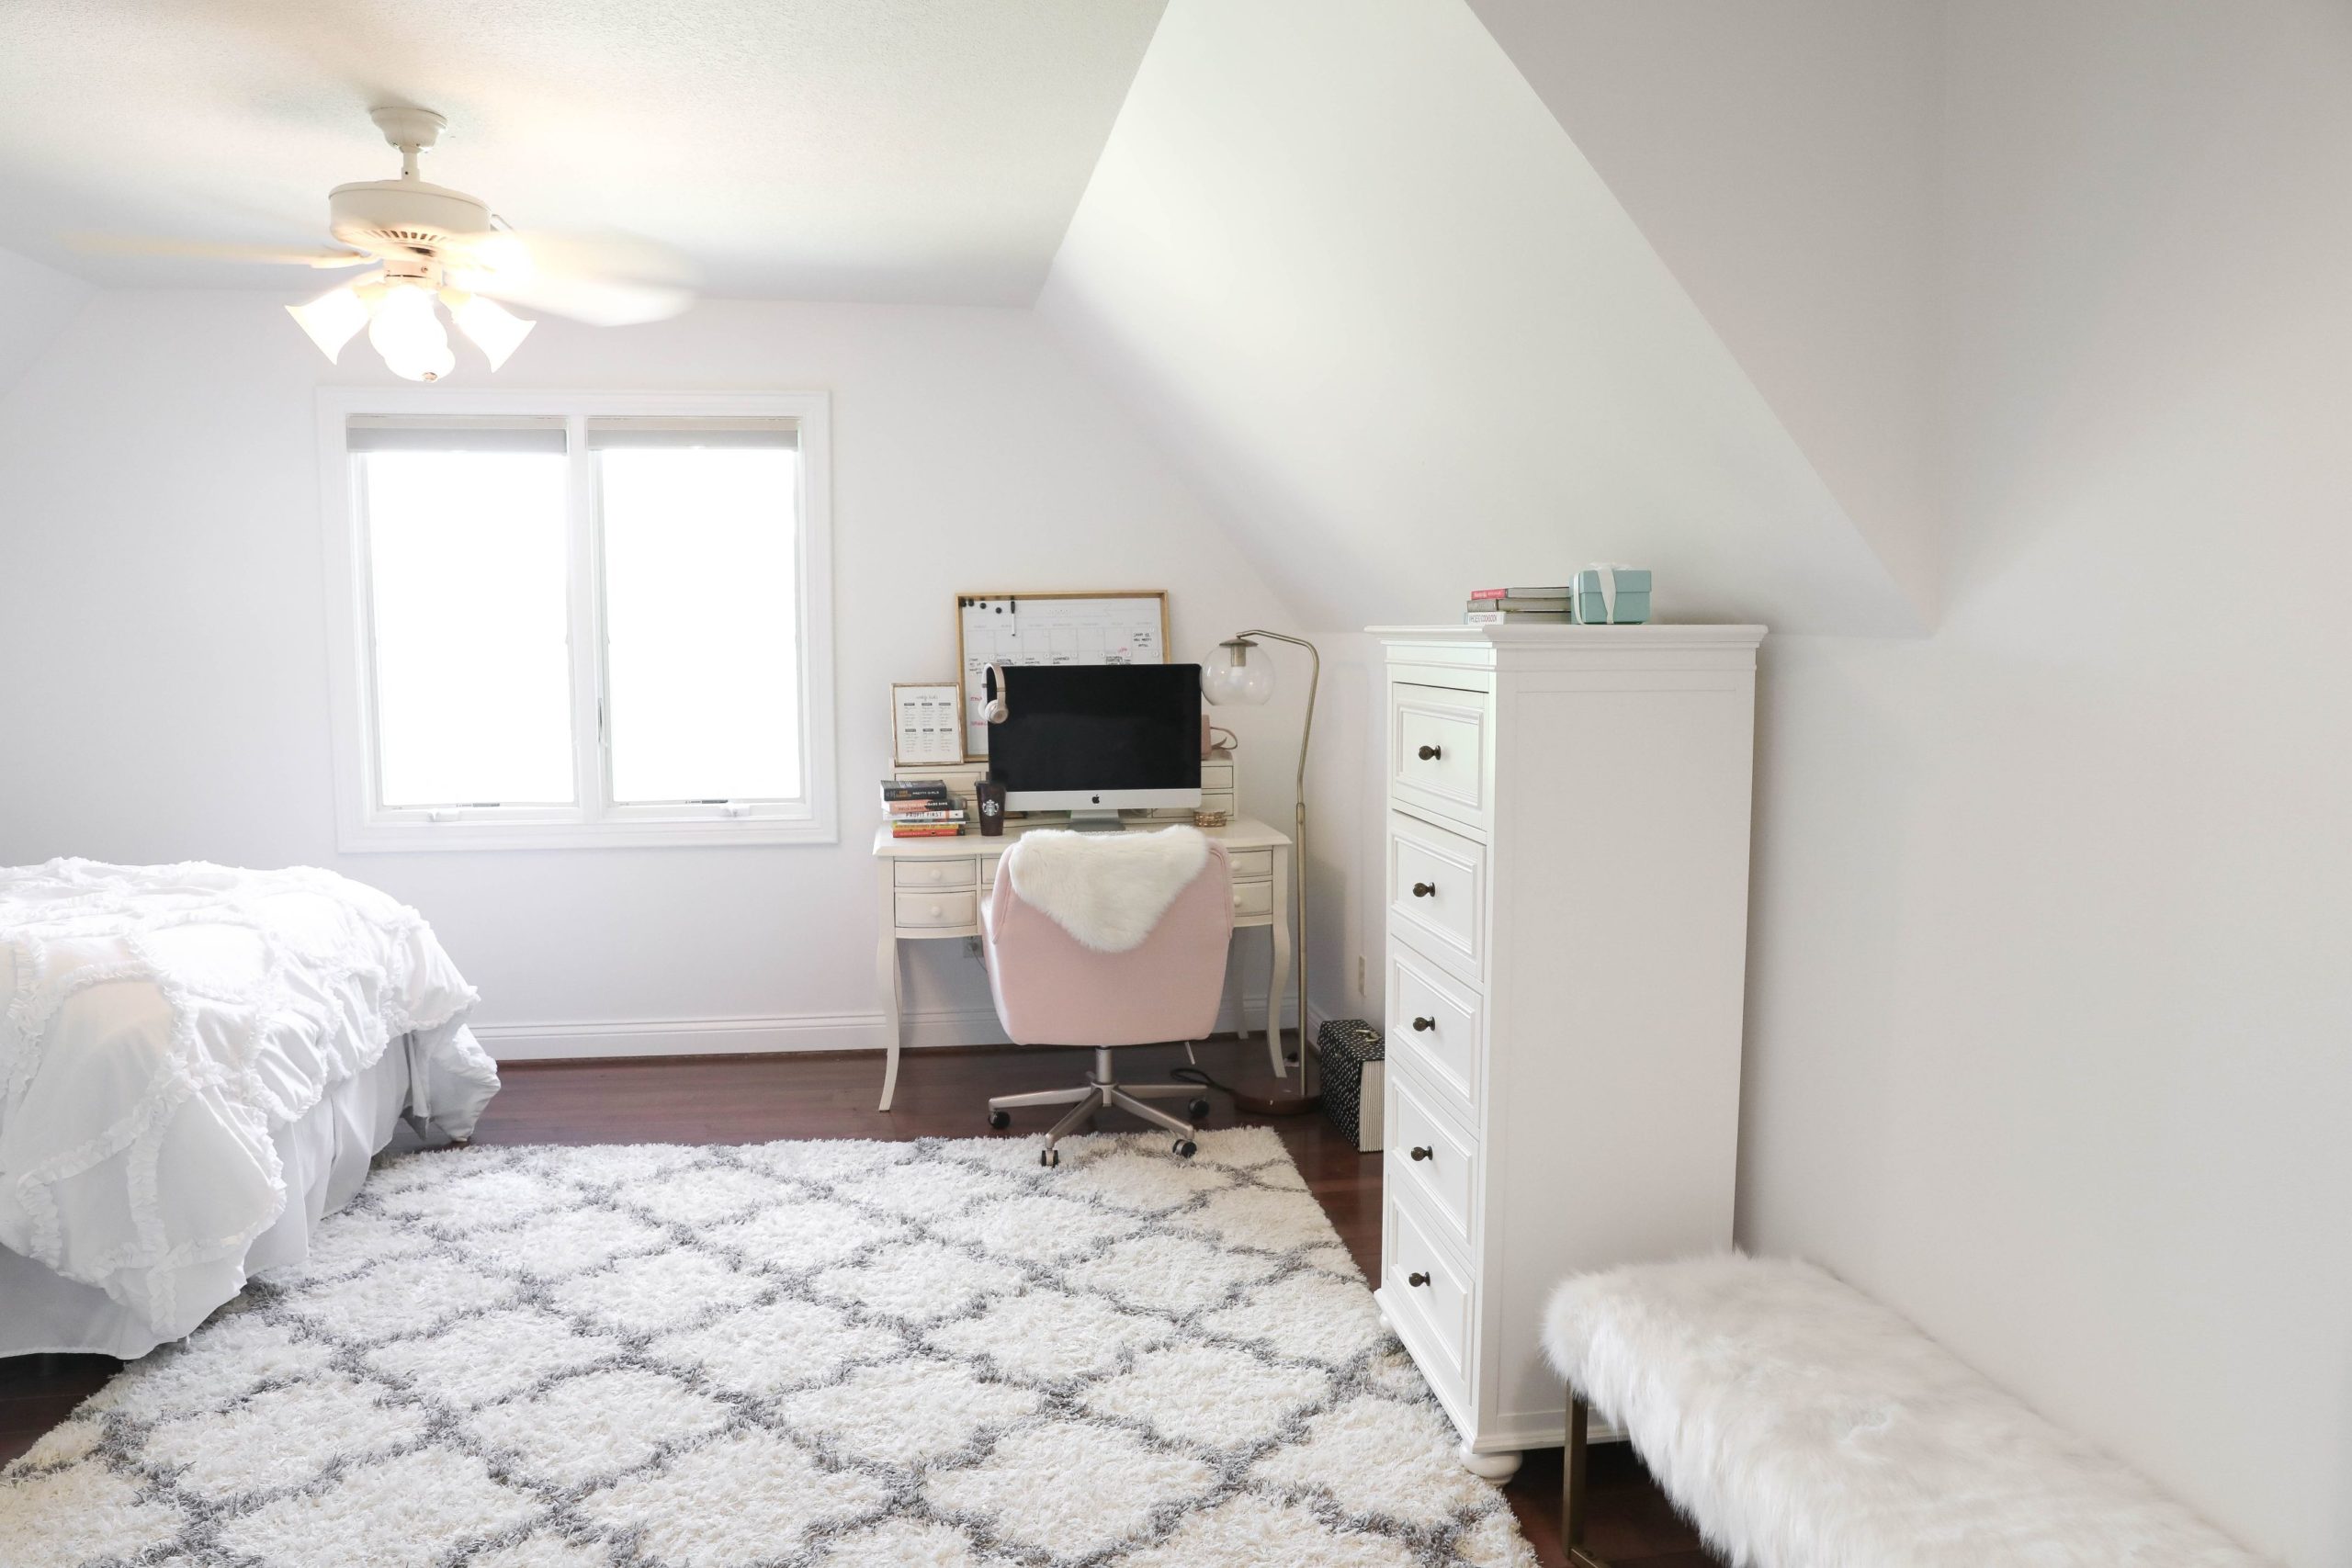 Year Long Room Transformation with Before and After Photos! Bright White Simple Room Decor! Details on Fashion Blog Daily Dose of Charm by Lauren Lindmark